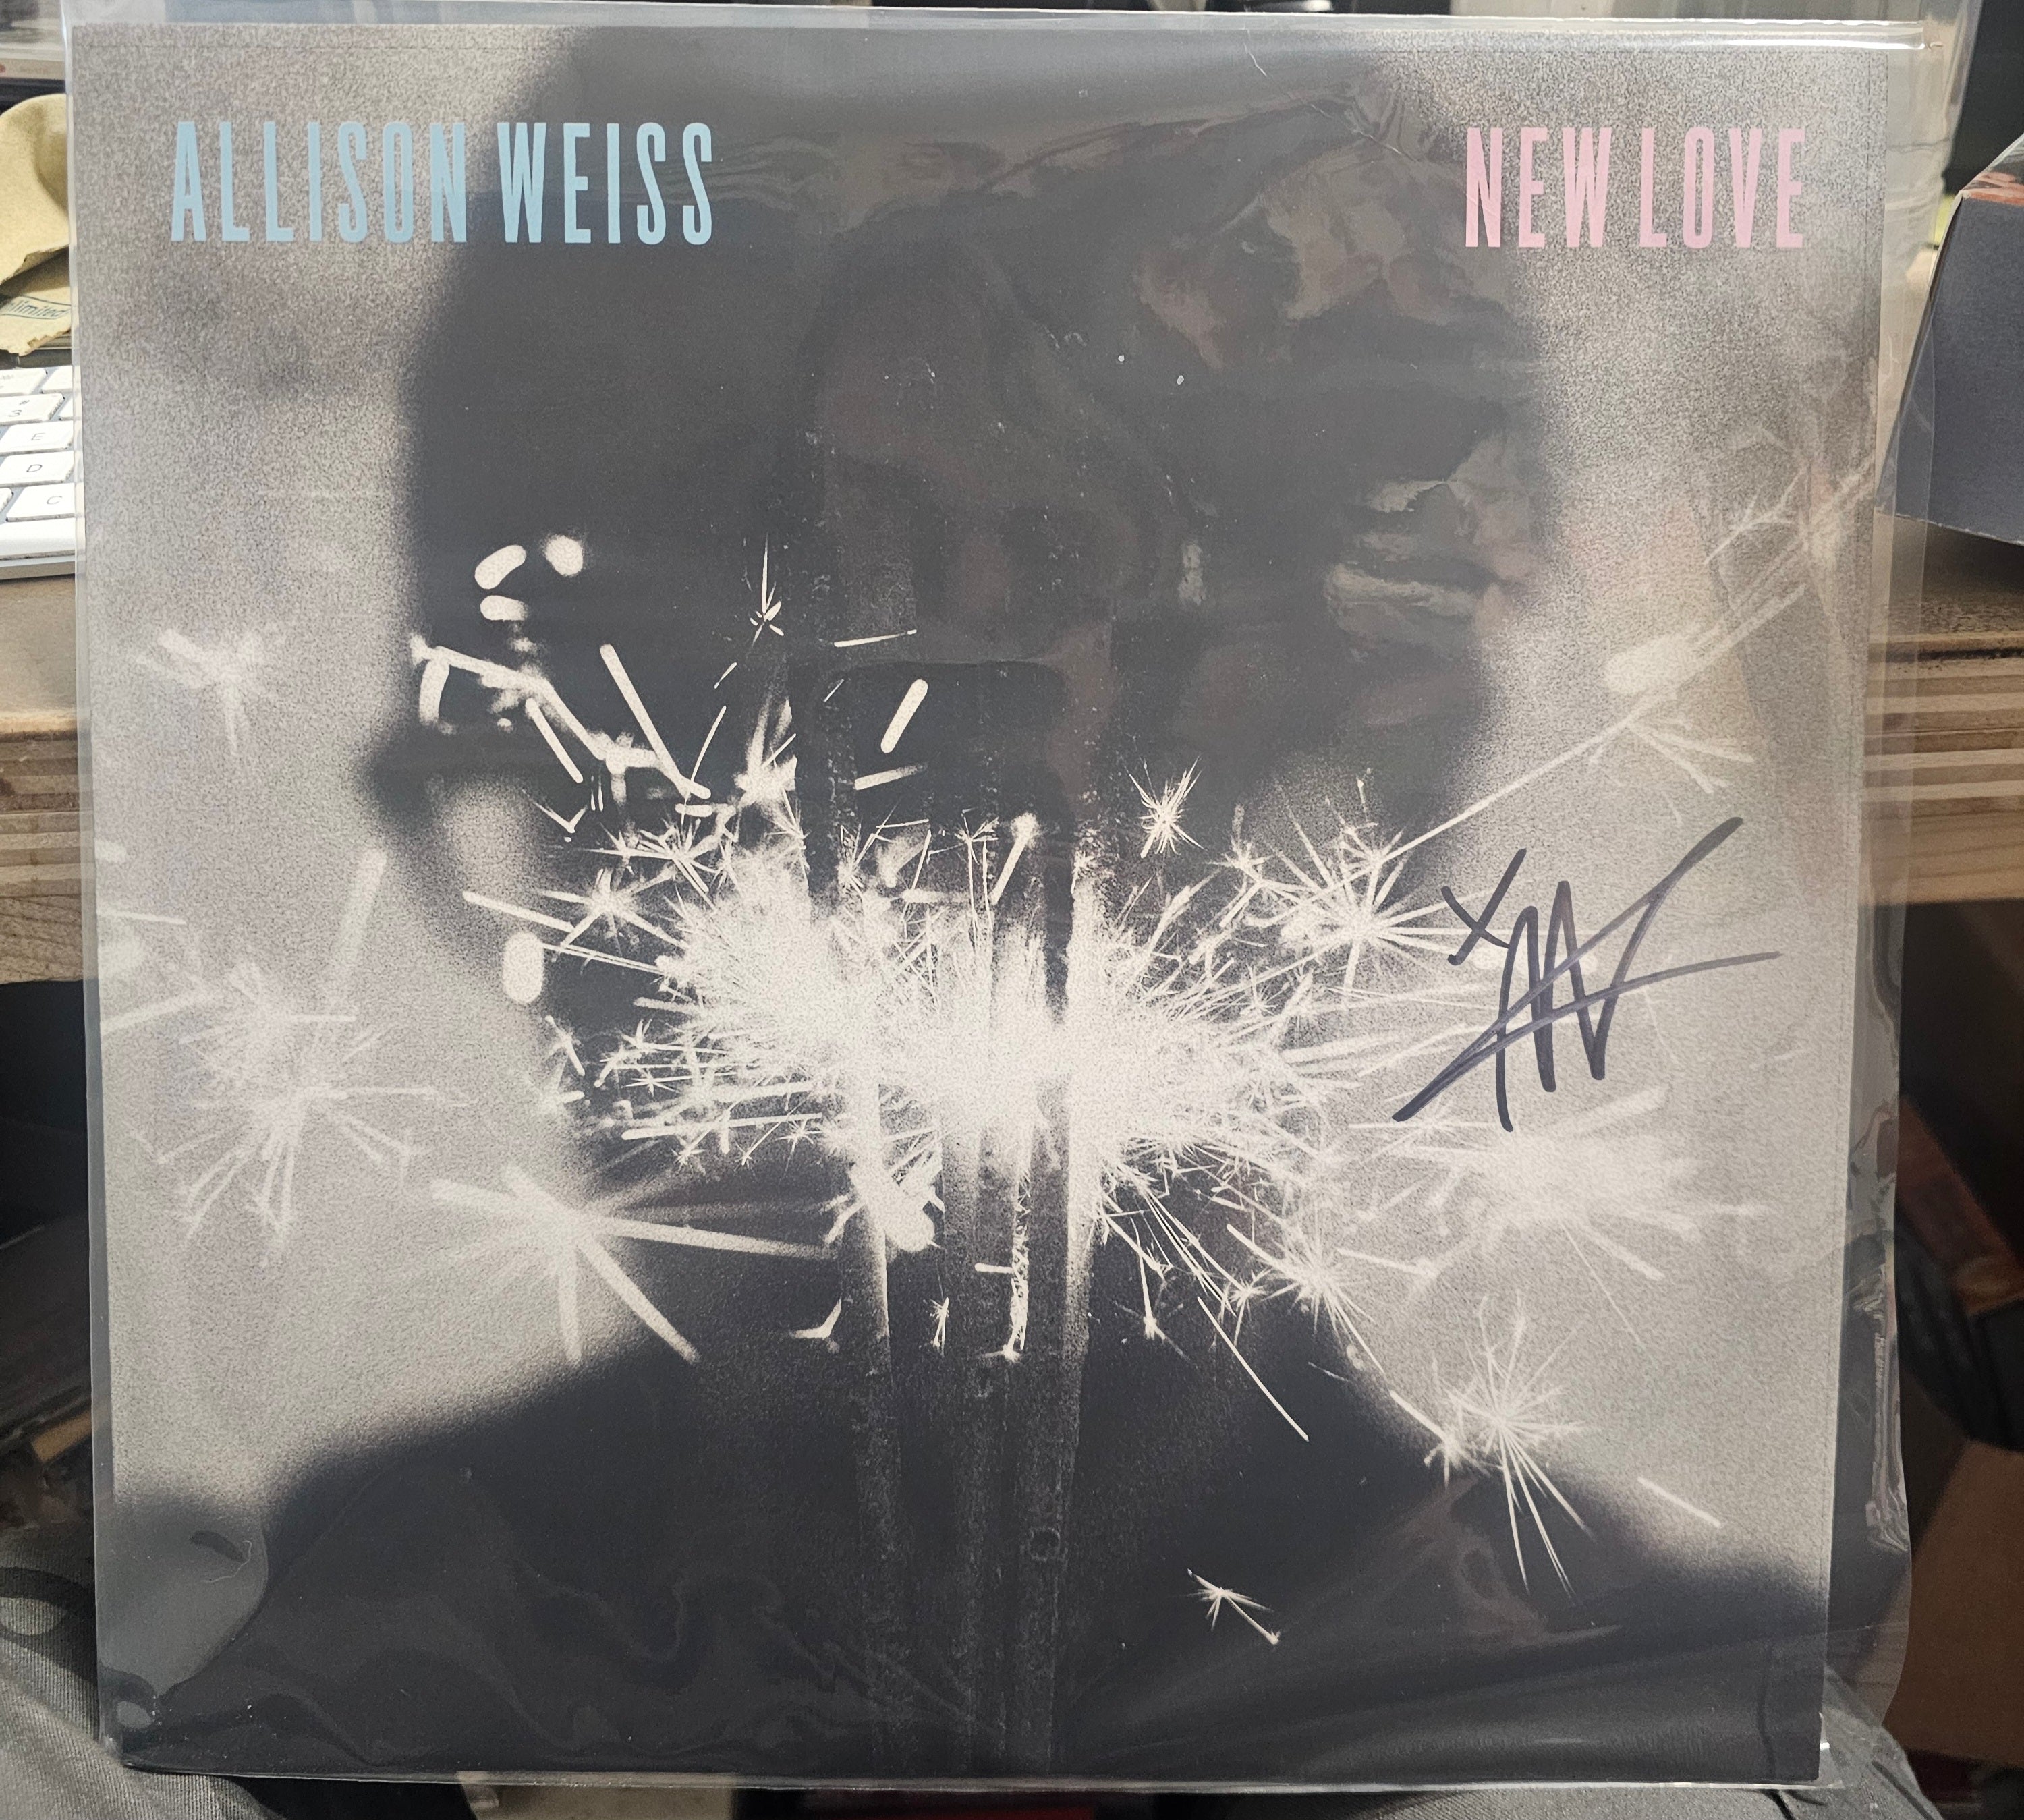 Allison Weiss- New Love (Clear W/ Blue & White Smoke) (Signed)